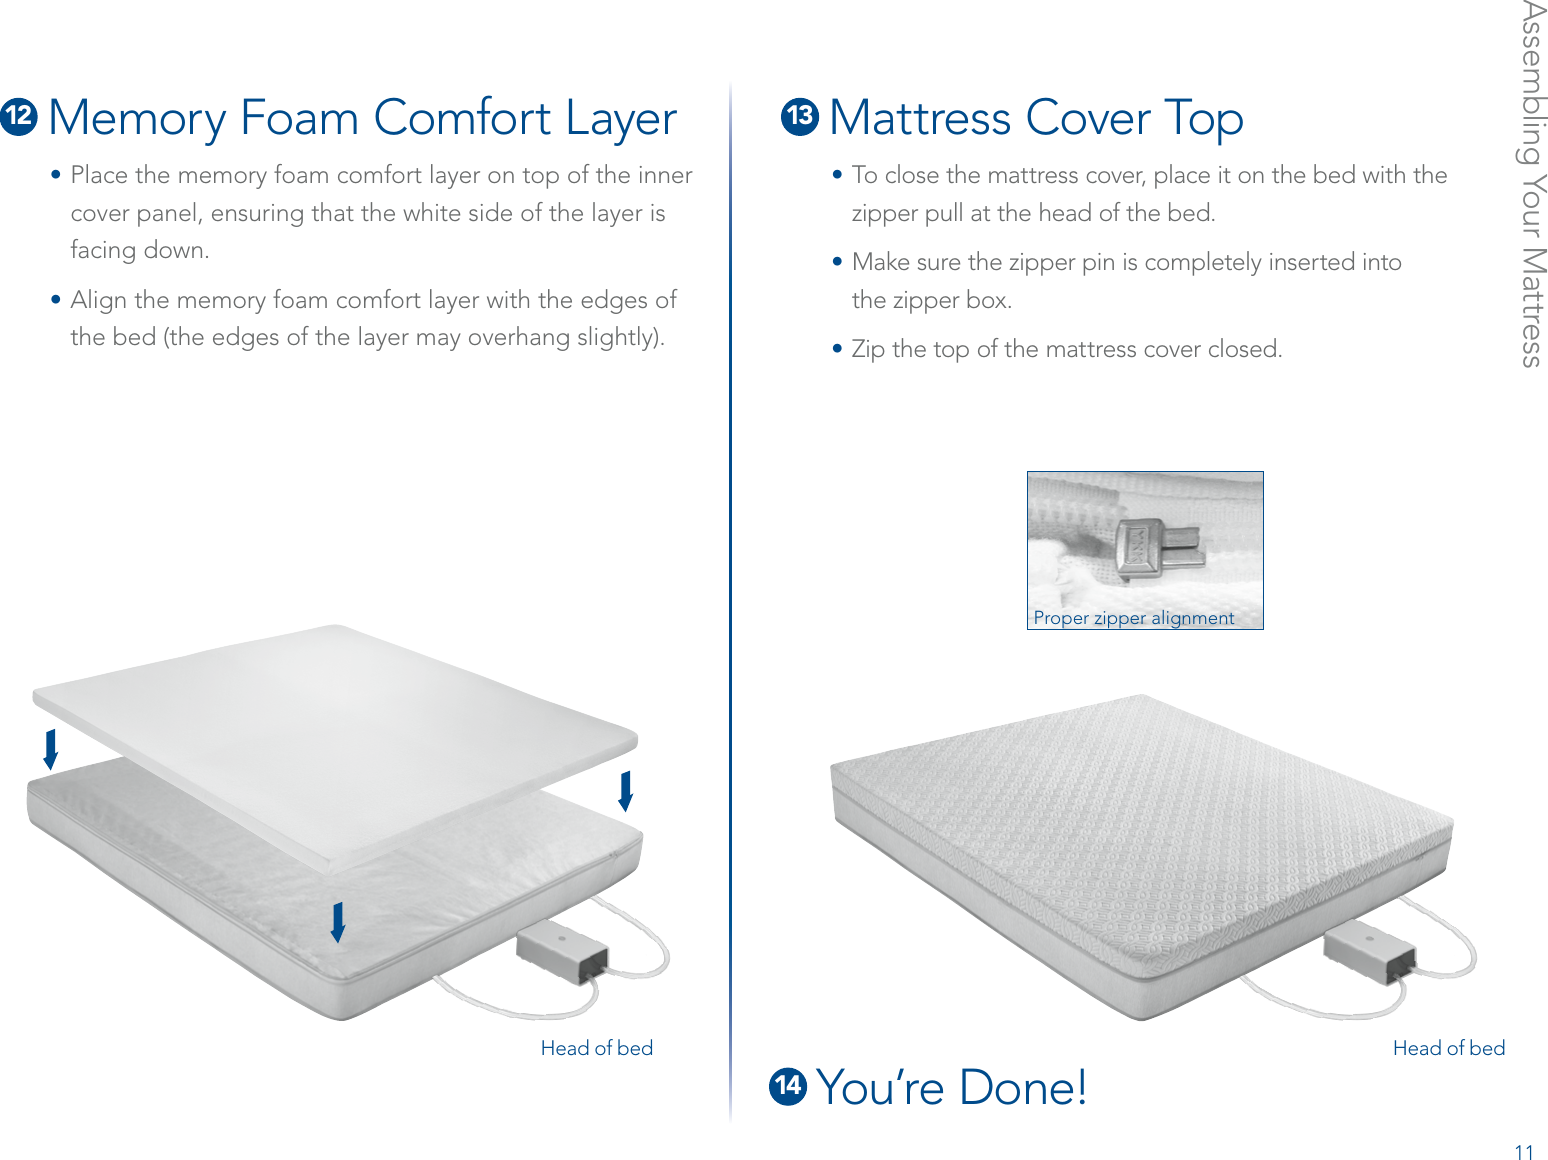 Assembling Your Mattress12  Memory Foam Comfort Layer• Place the memory foam comfort layer on top of the inner cover panel, ensuring that the white side of the layer is facing down.• Align the memory foam comfort layer with the edges of the bed (the edges of the layer may overhang slightly).13  Mattress Cover Top•  To close the mattress cover, place it on the bed with the zipper pull at the head of the bed.• Make sure the zipper pin is completely inserted into  the zipper box.• Zip the top of the mattress cover closed.Proper zipper alignment14  You’re Done!Head of bed Head of bed11